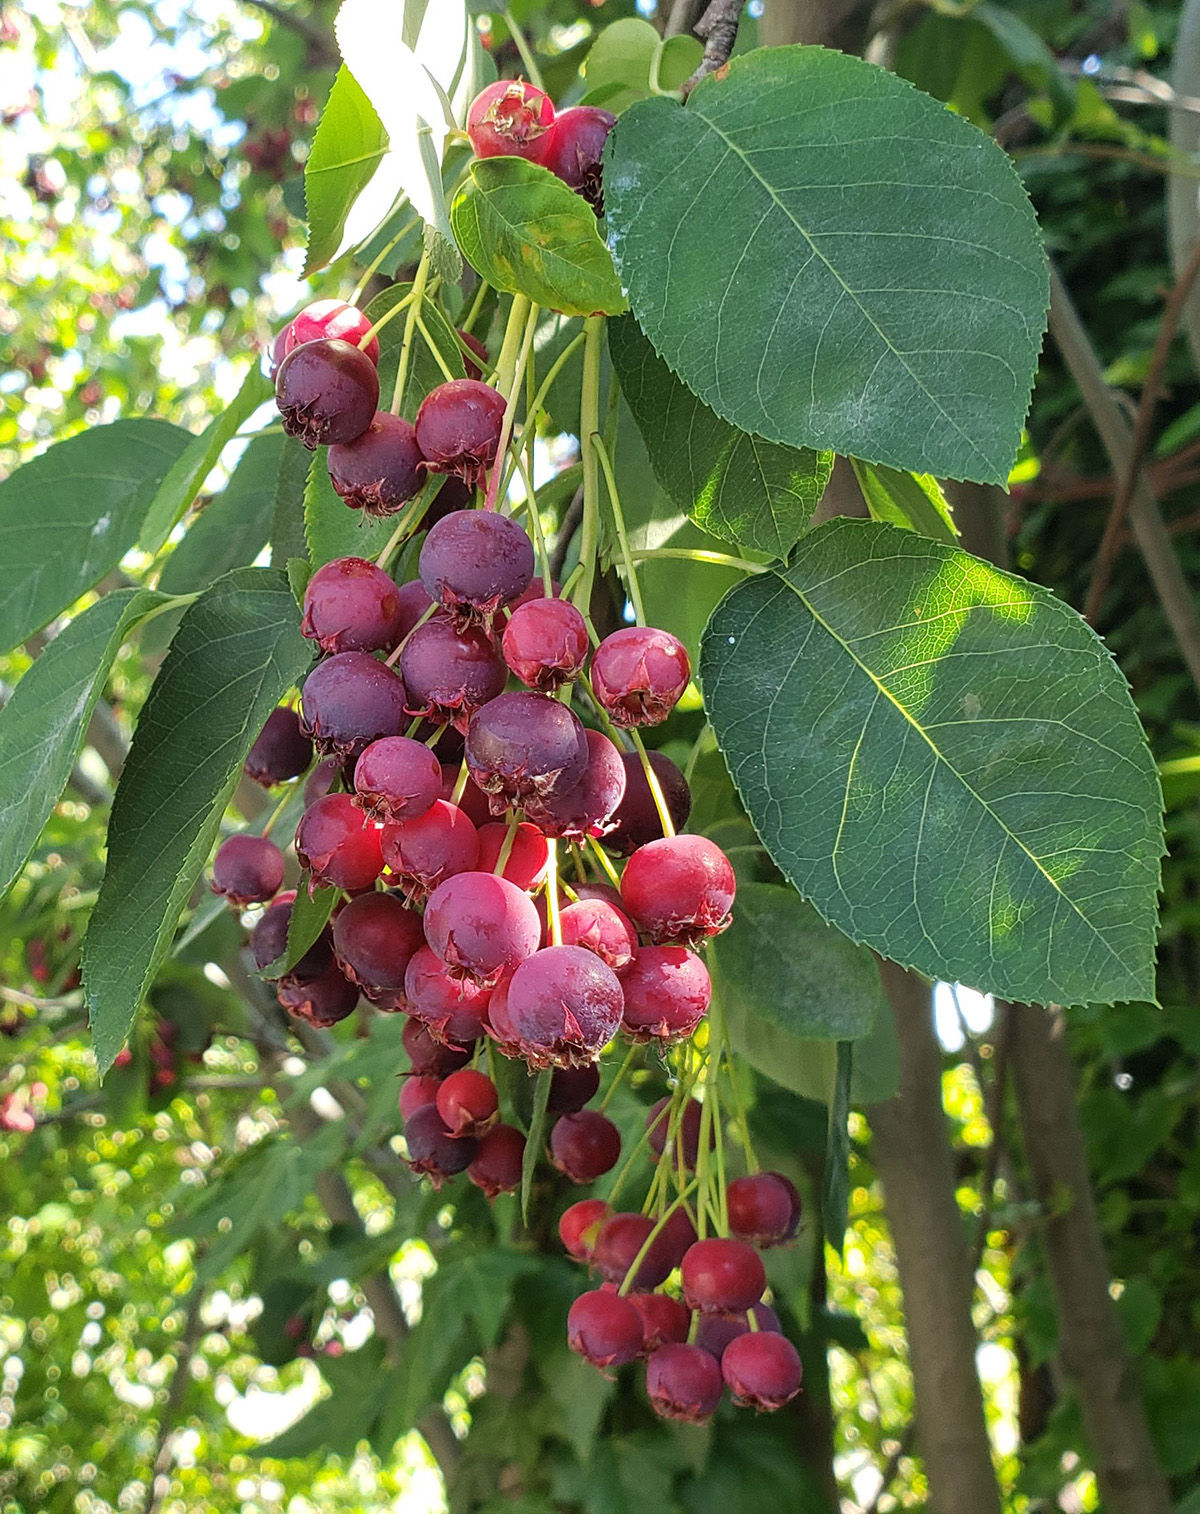 Serviceberries: Forage the Sweet Fruit for Good Eats